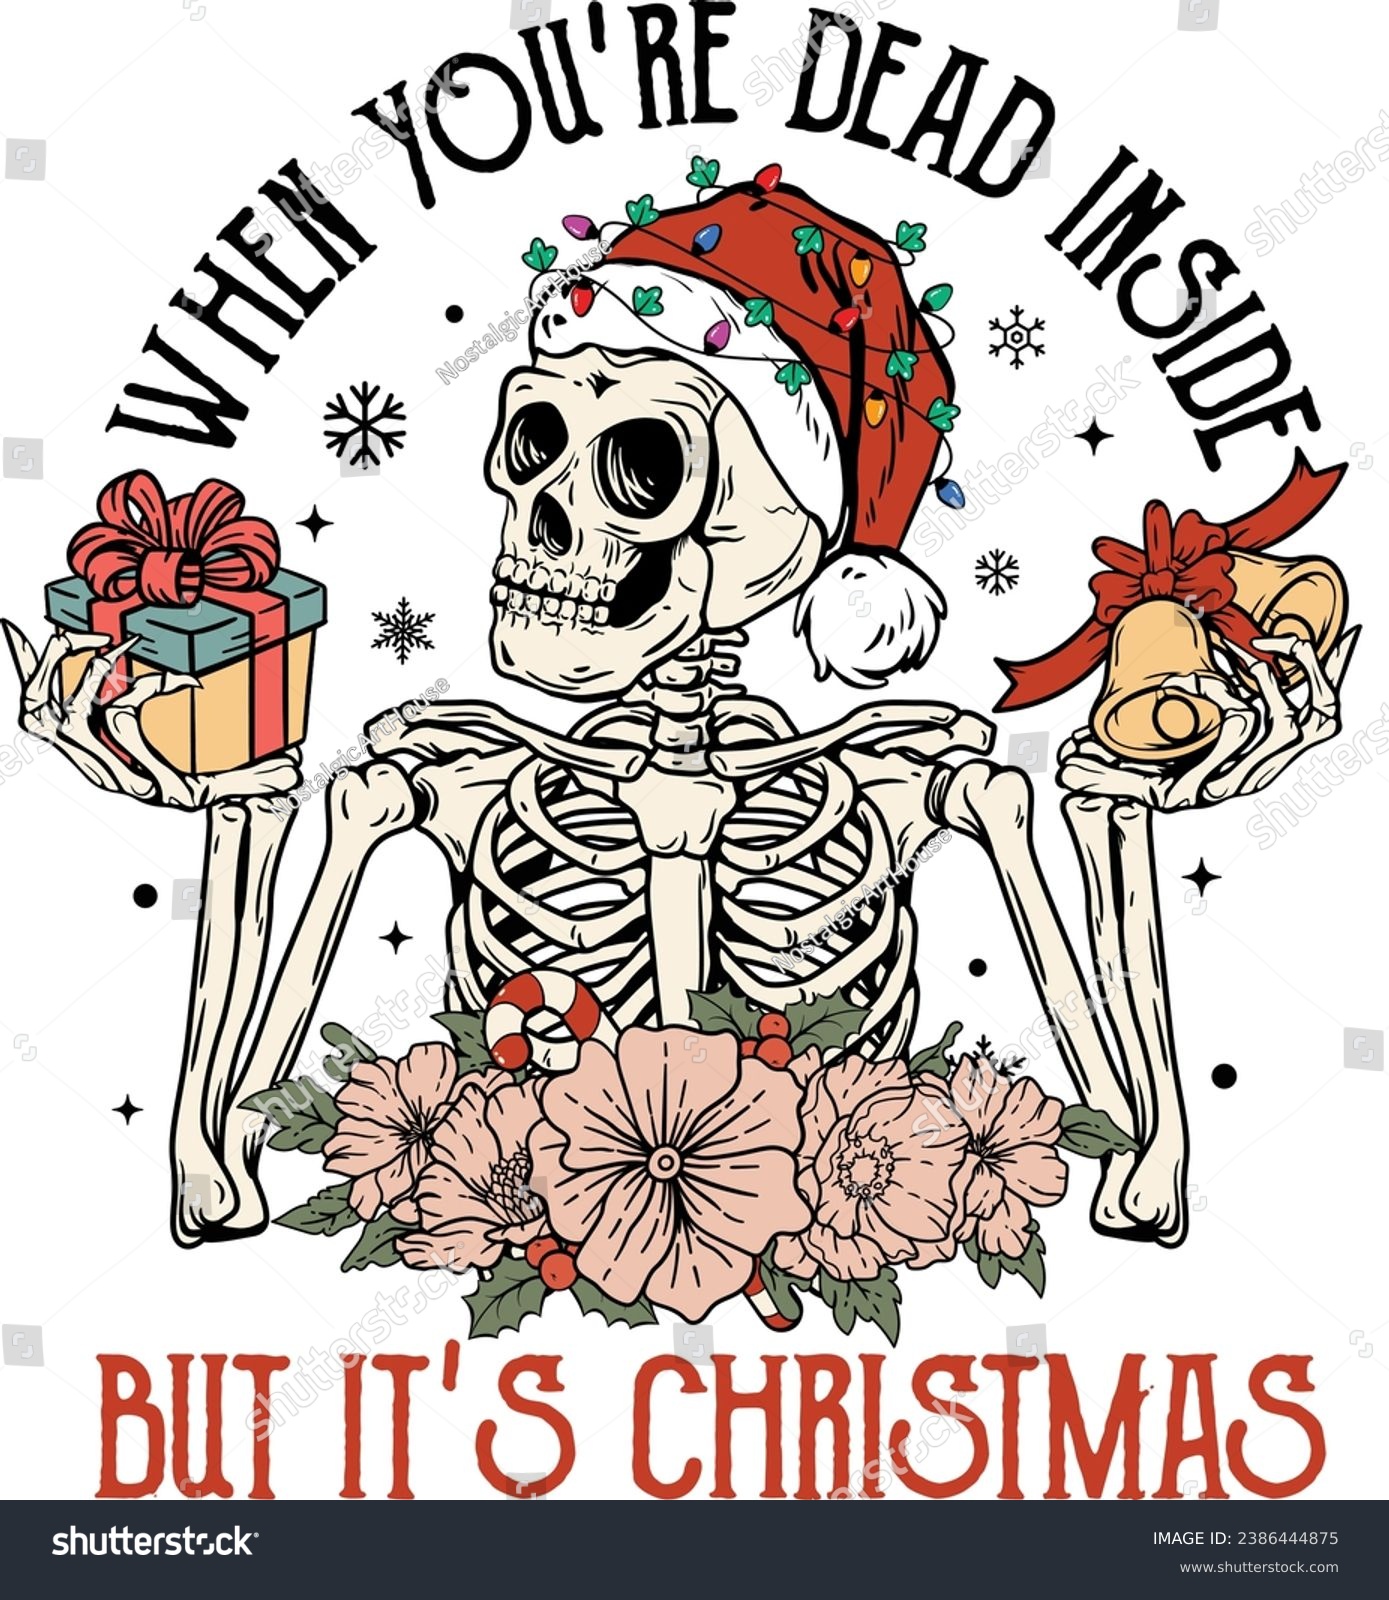 SVG of When you're dead inside but it's christmas, santa skull christmas, skull santa claus, christmas gifts, santa hat, skeleton santa, dead inside svg